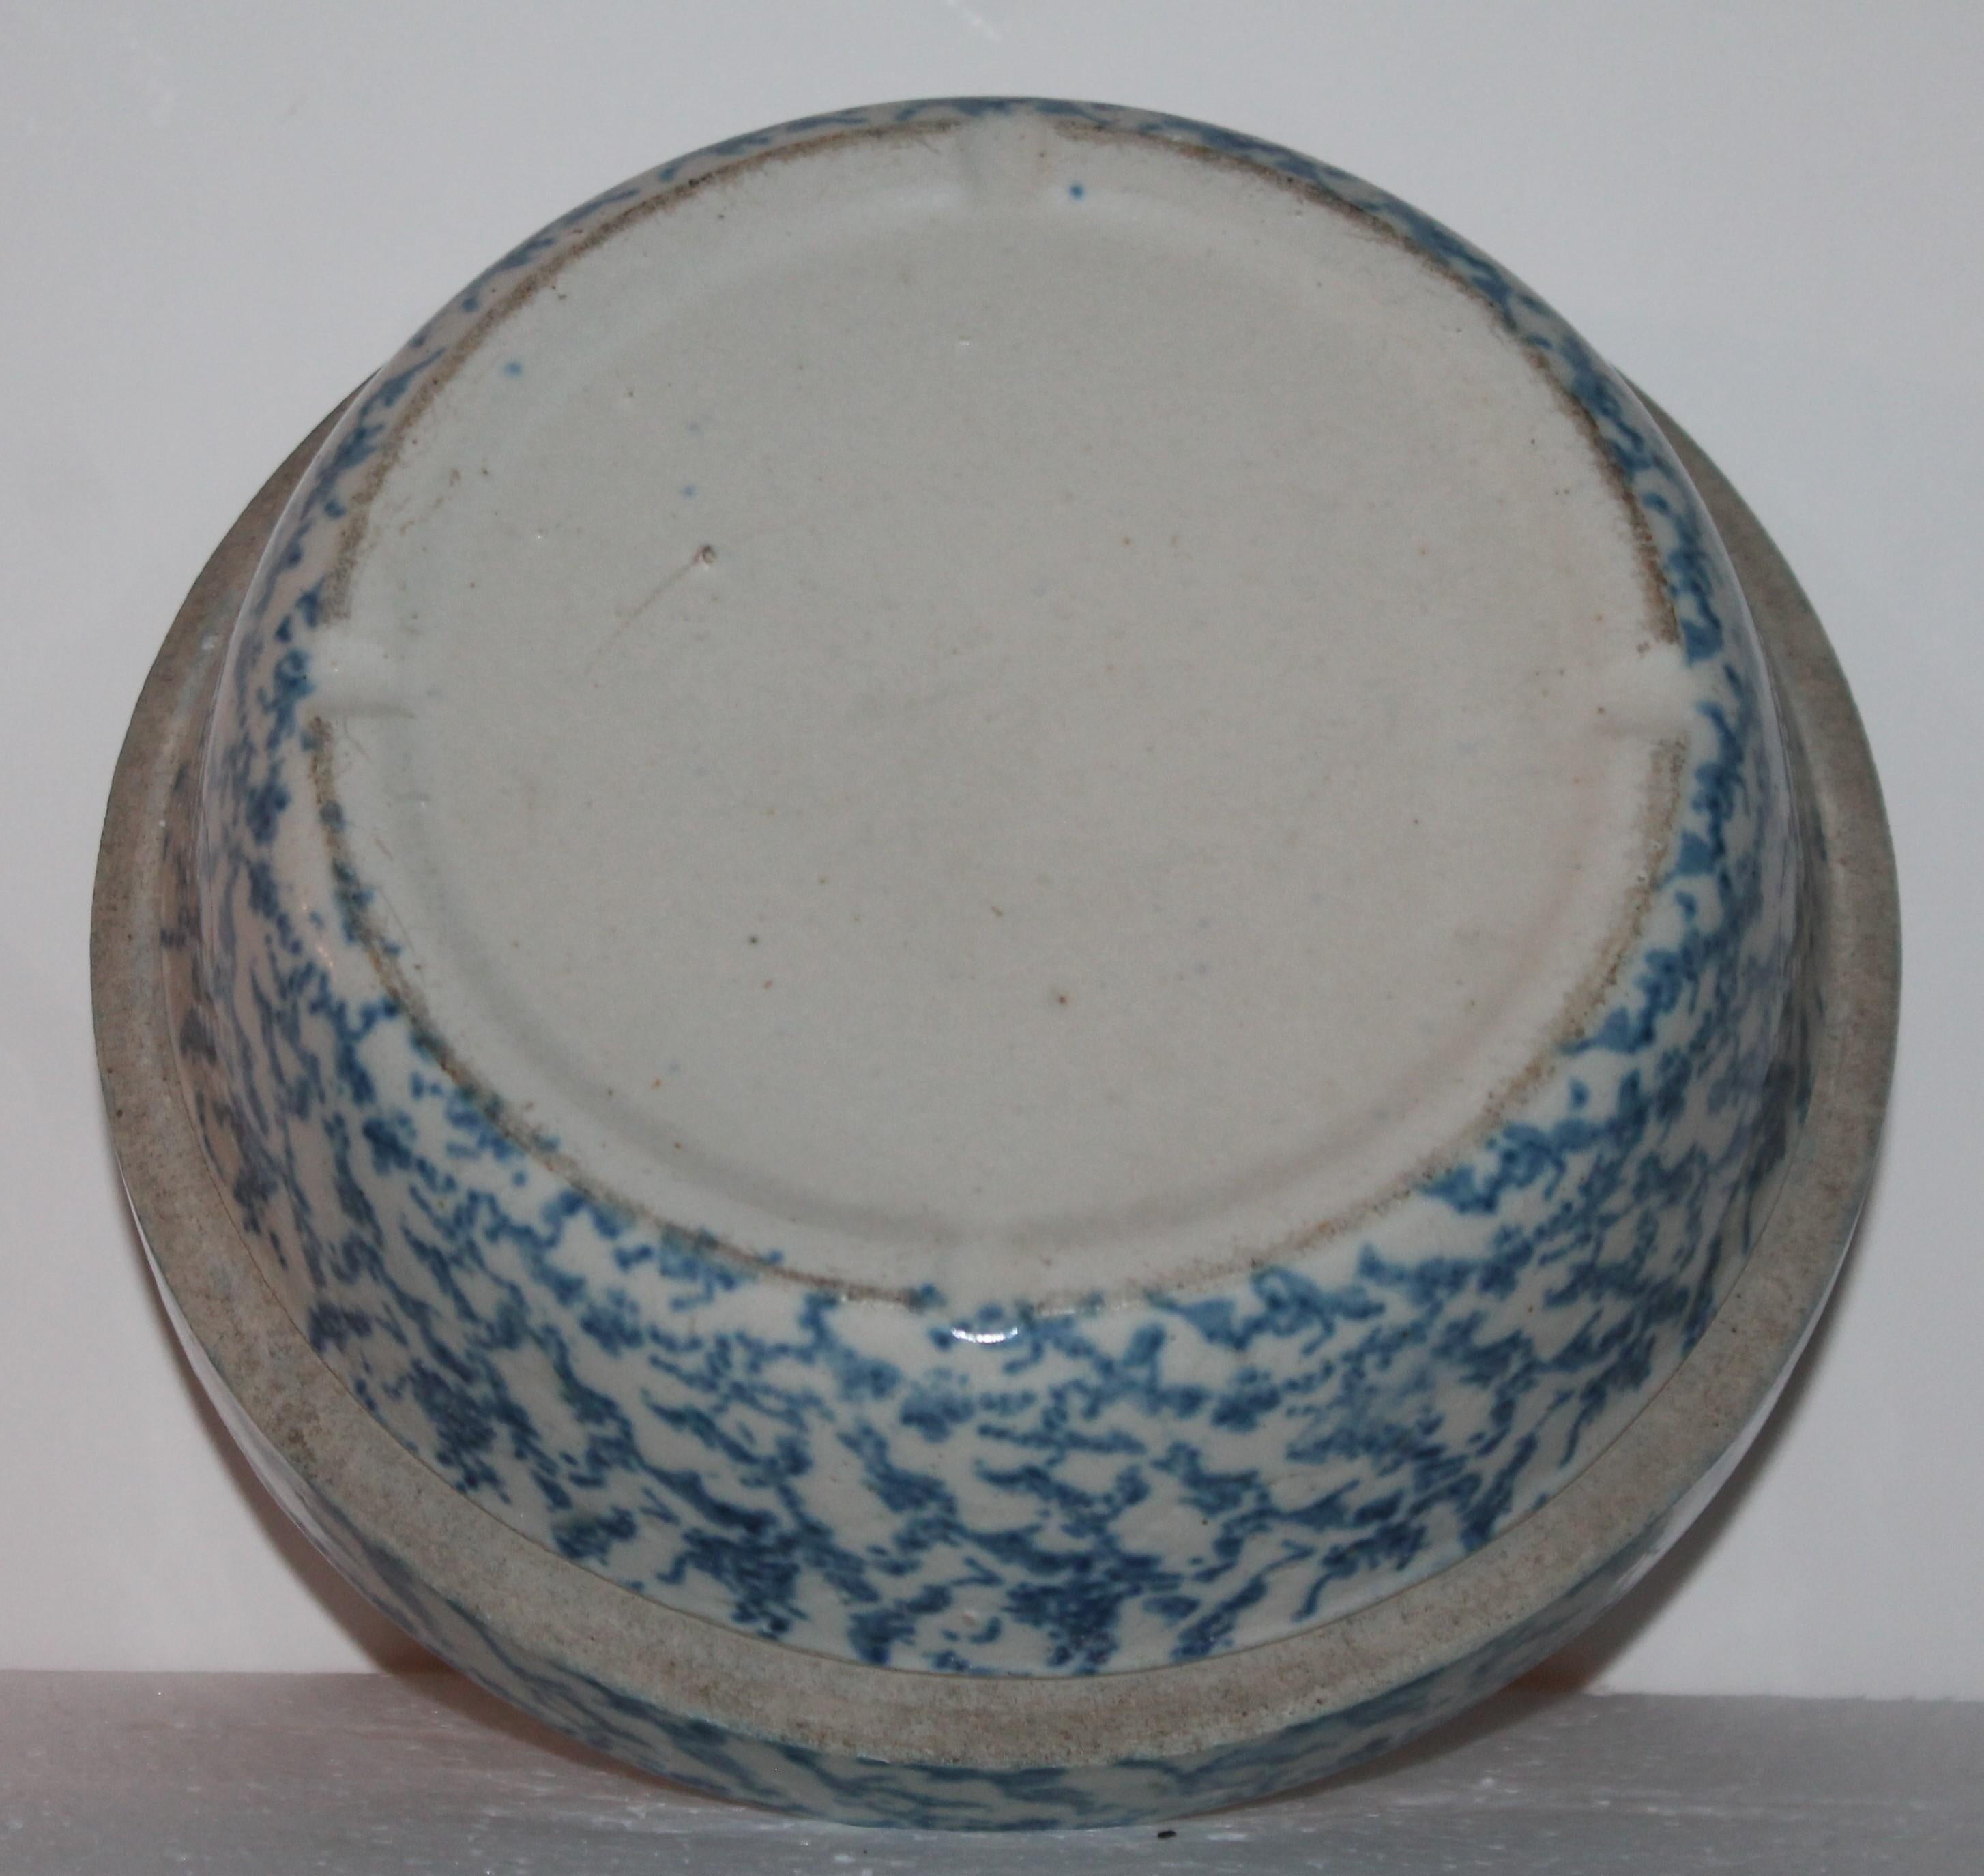 Hand-Crafted 19th Century Sponge Ware Pottery Bake Dishes For Sale